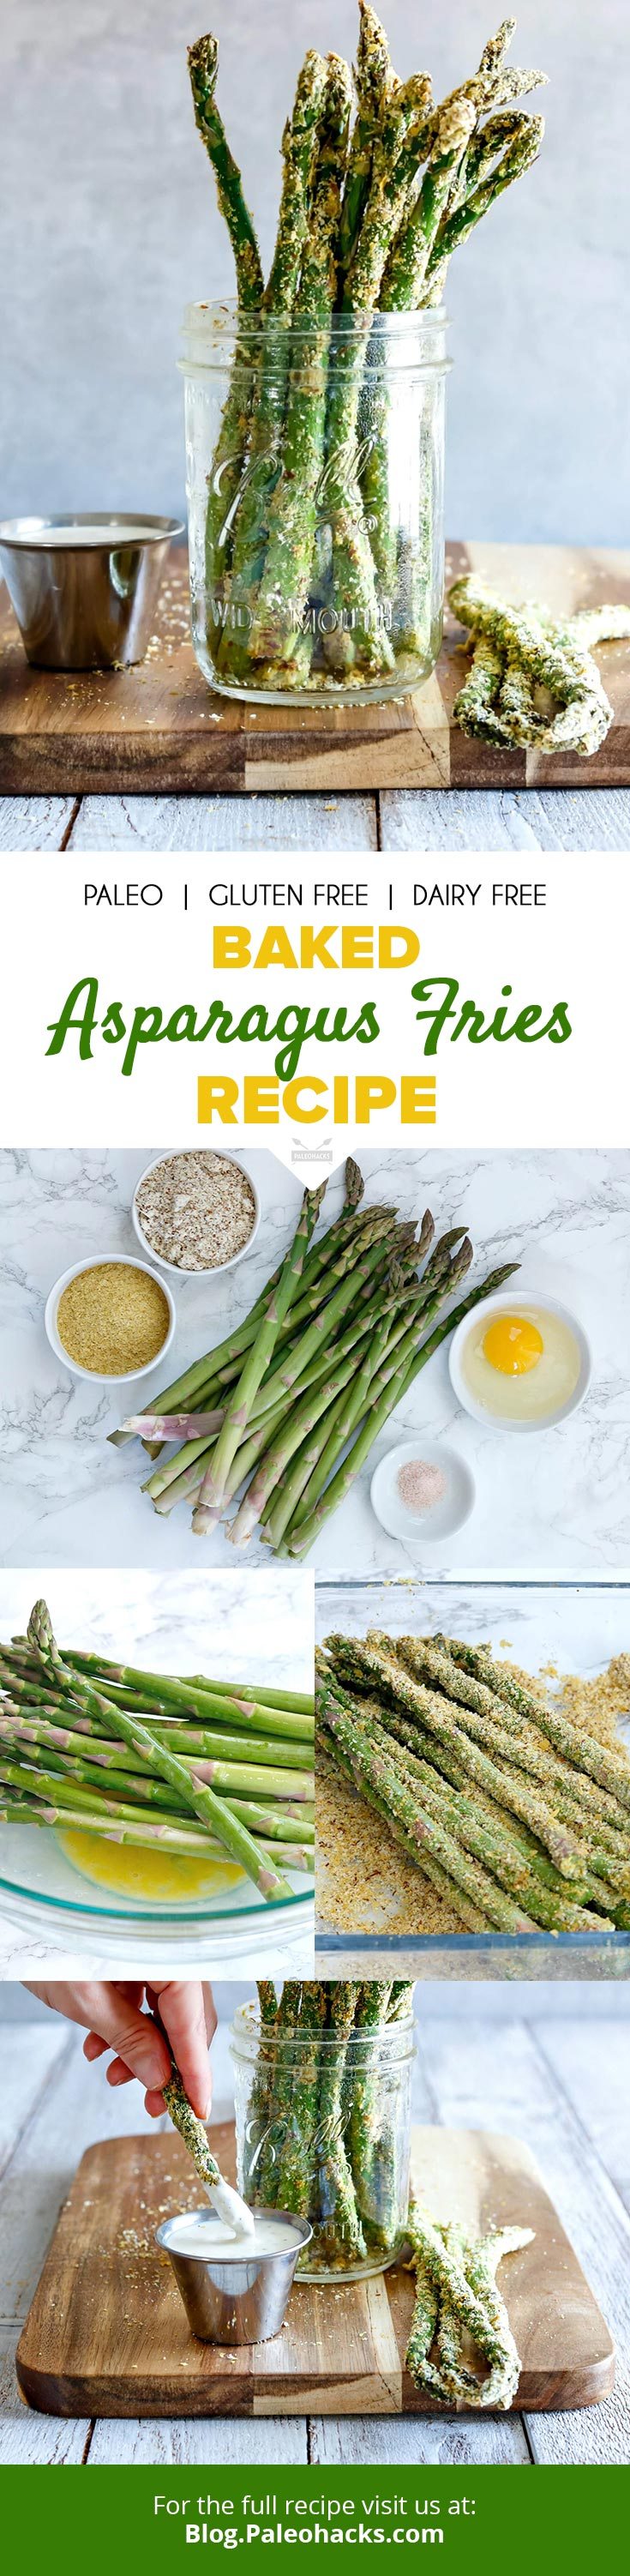 Spring is in the air with this garden-fresh French fry alternative. This asparagus is baked to crisp perfection with a crunchy coating; ready to eat in 20 minutes flat.